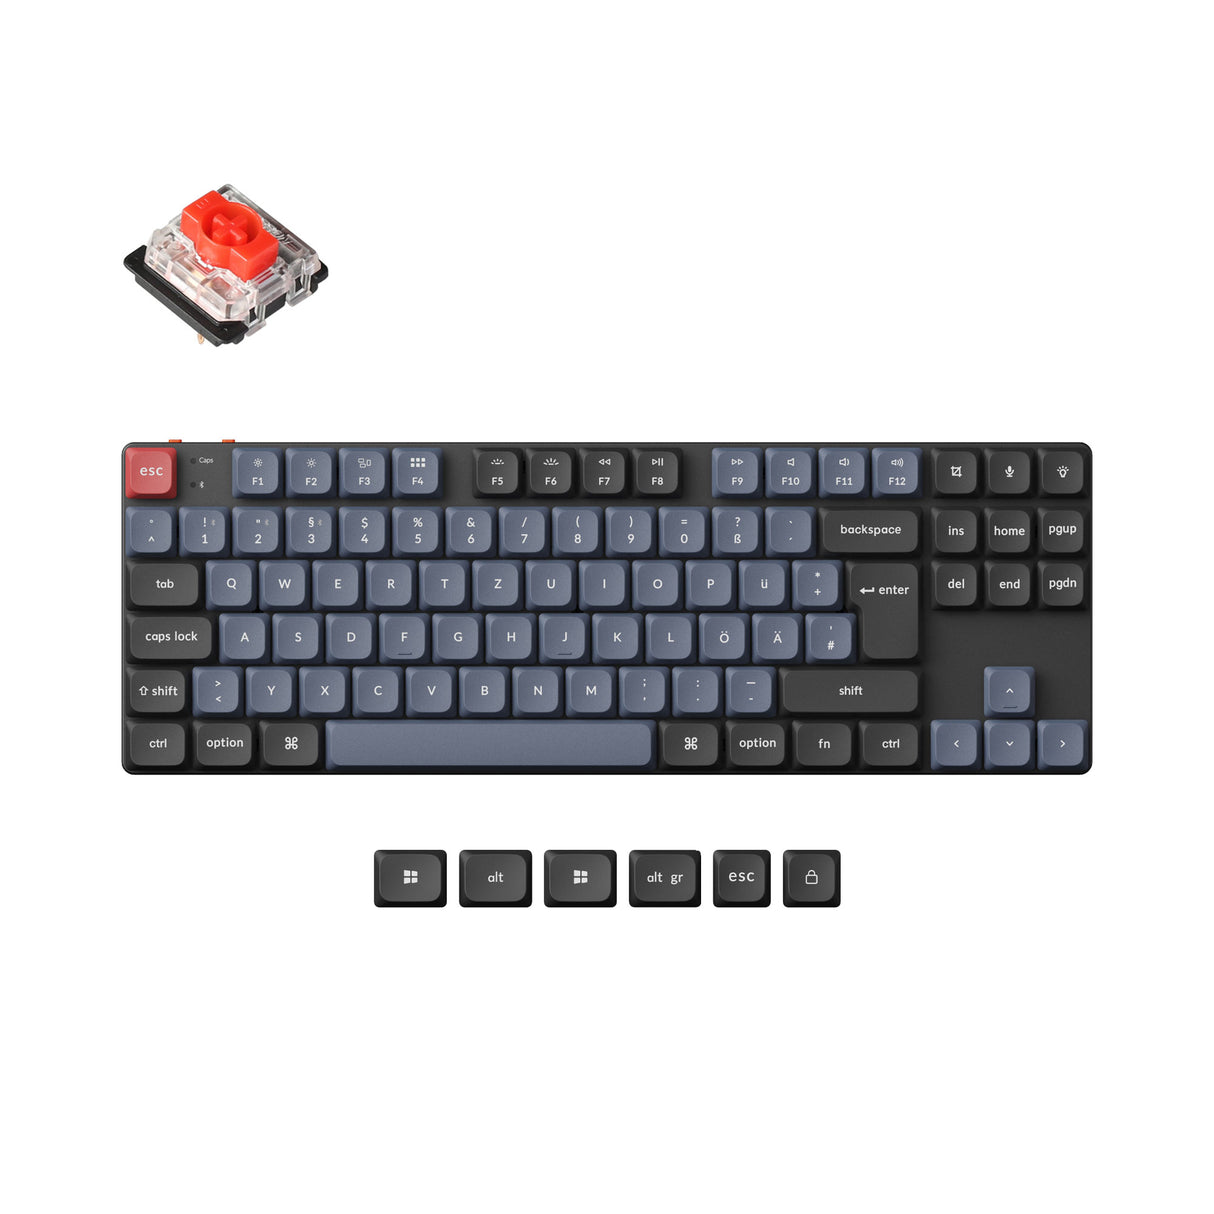 Keychron K1 Pro QMK VIA low profile custom mechanical keyboard TKL layout PBT Keycaps hot-swappable Gateron low profile switch red ISO German layout